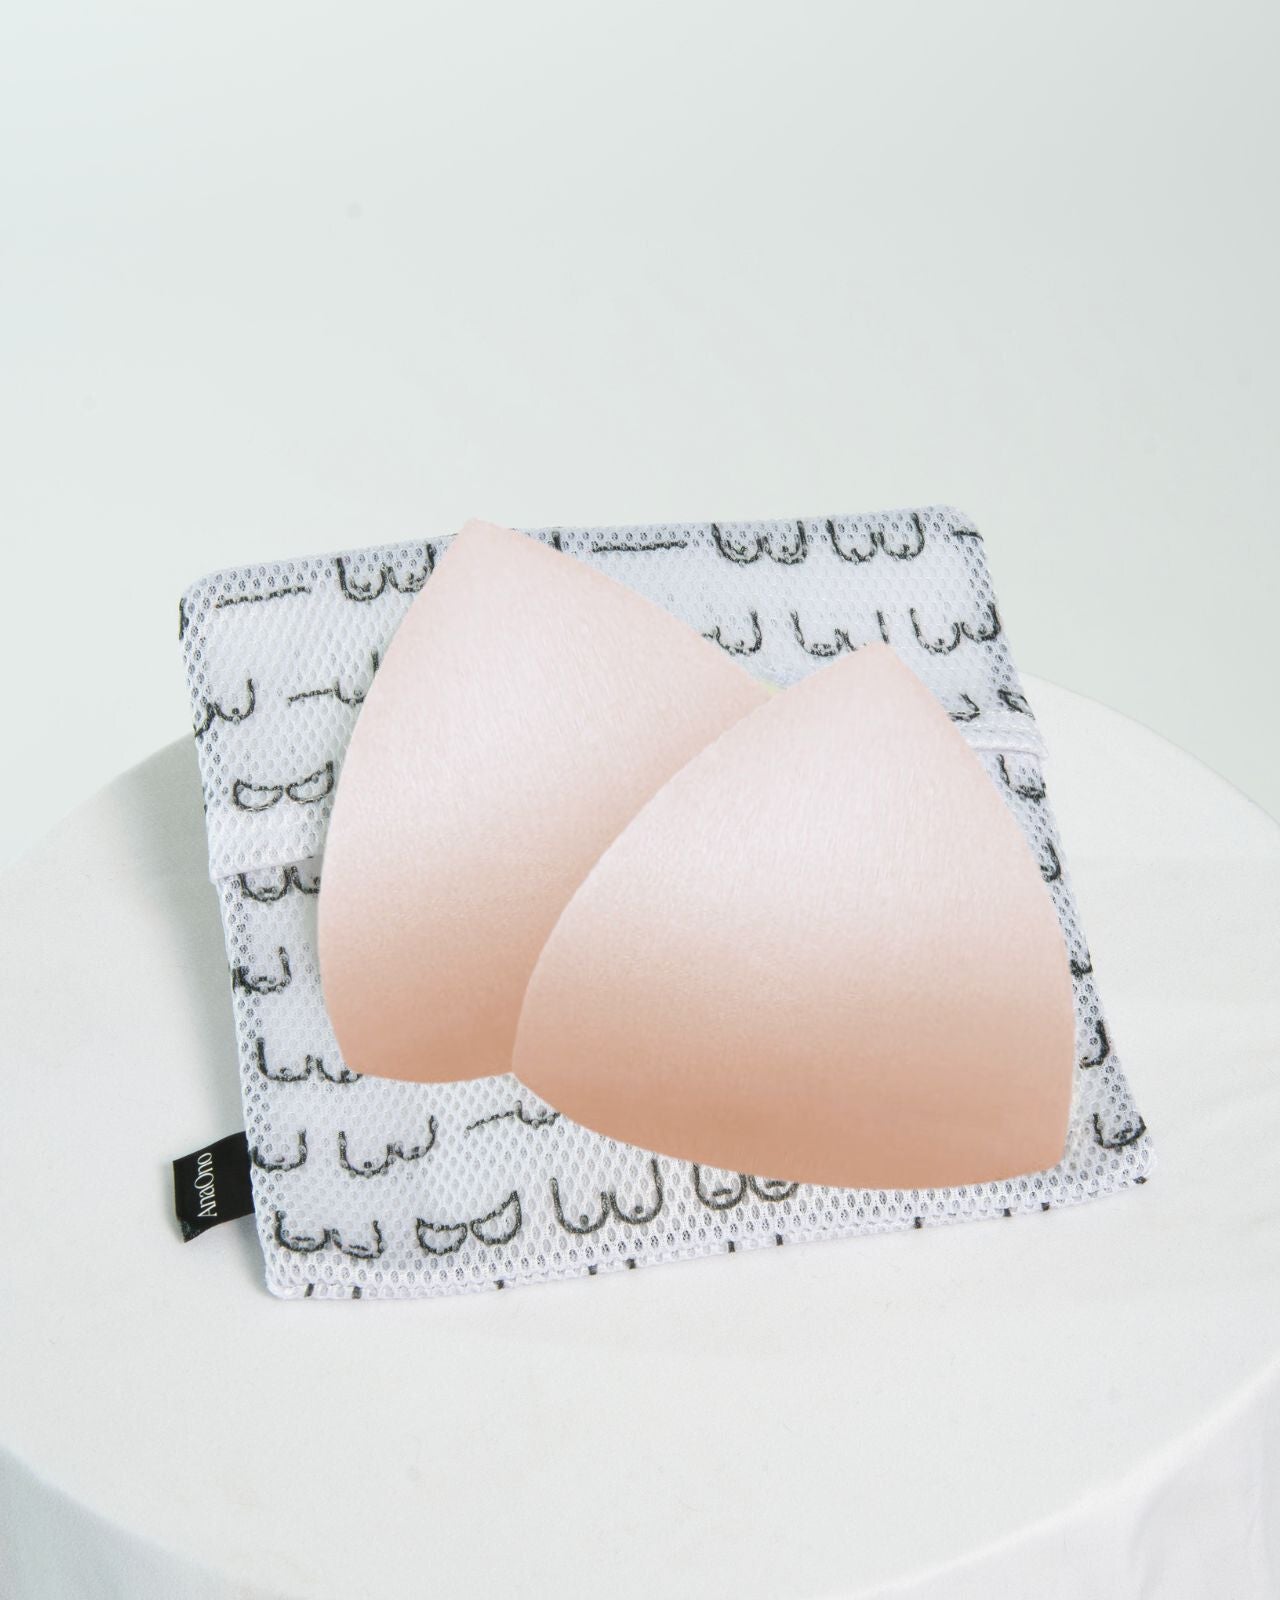 Modesty Bra Pad Inserts, Perfect for Pocketed Bras